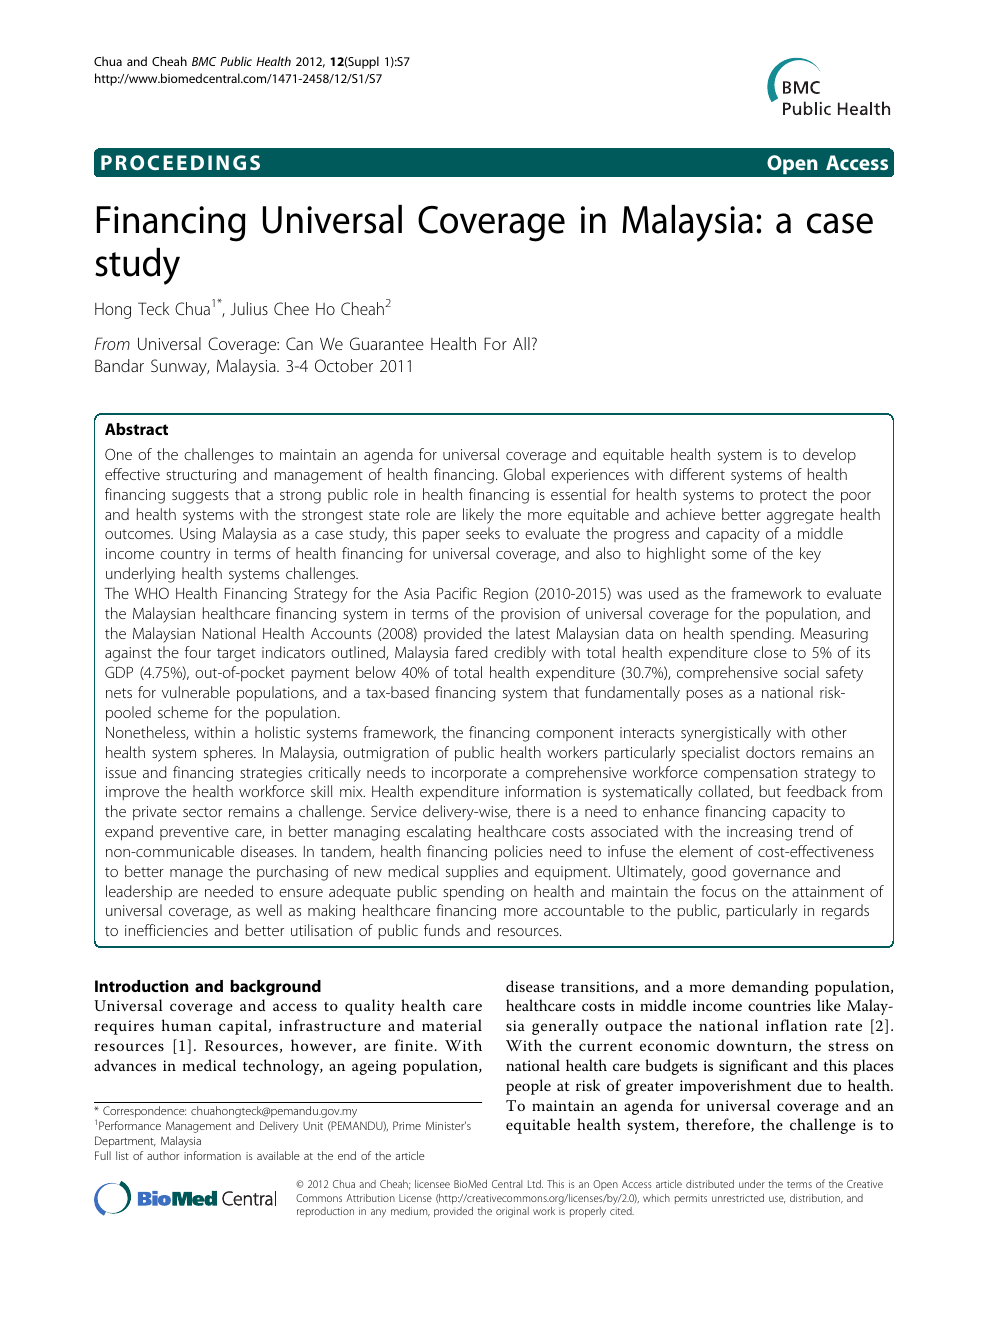 Financing Universal Coverage In Malaysia A Case Study Topic Of Research Paper In Economics And Business Download Scholarly Article Pdf And Read For Free On Cyberleninka Open Science Hub